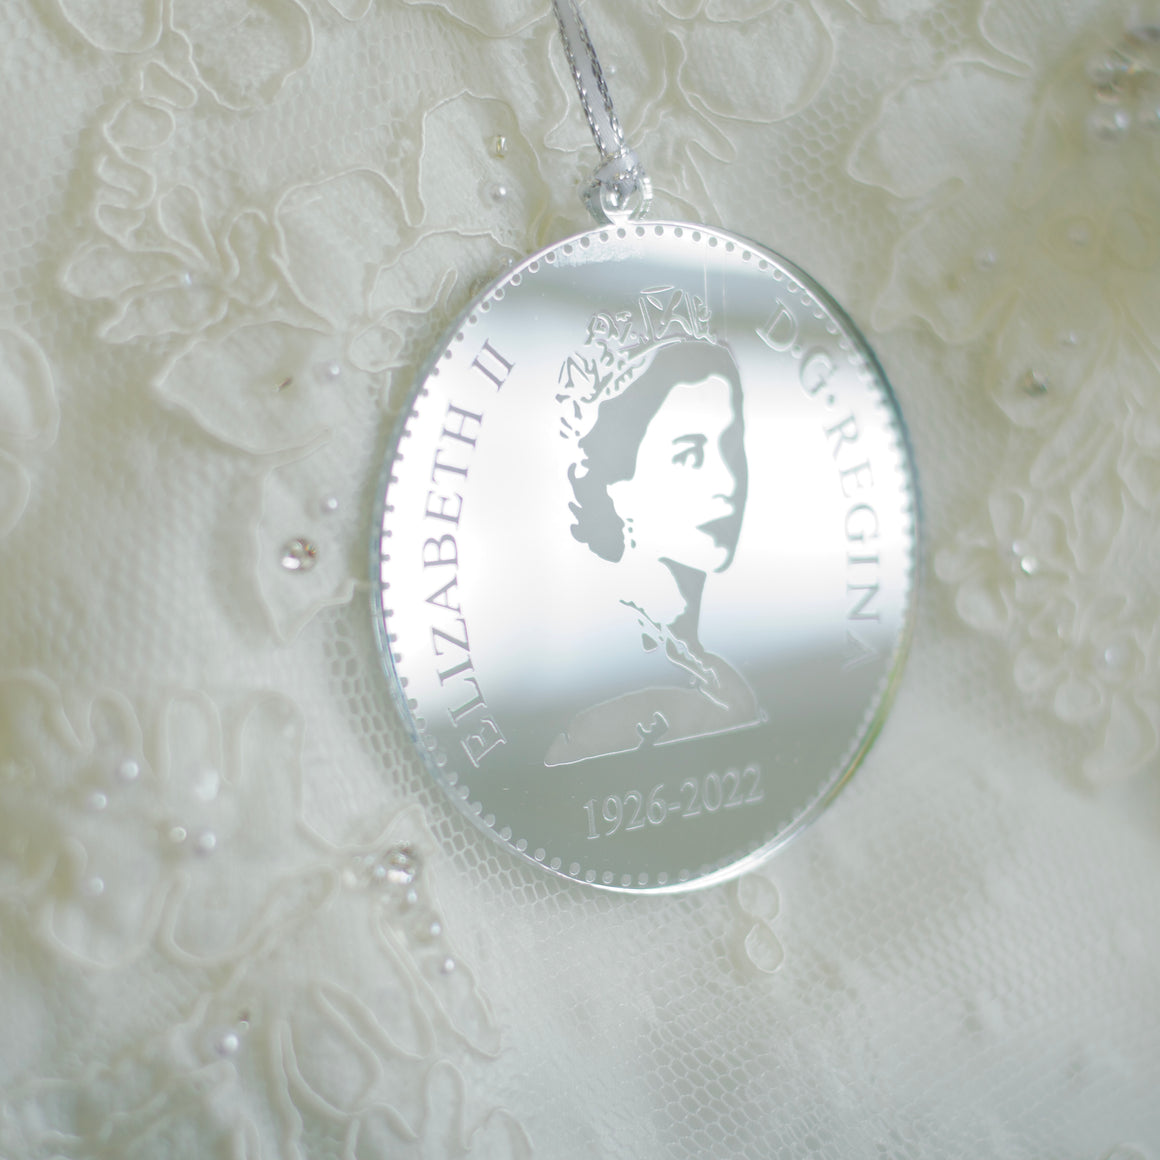 Silver Queen Elizabeth II Christmas tree ornament, appears as a replica of the back of a nickel or dime.